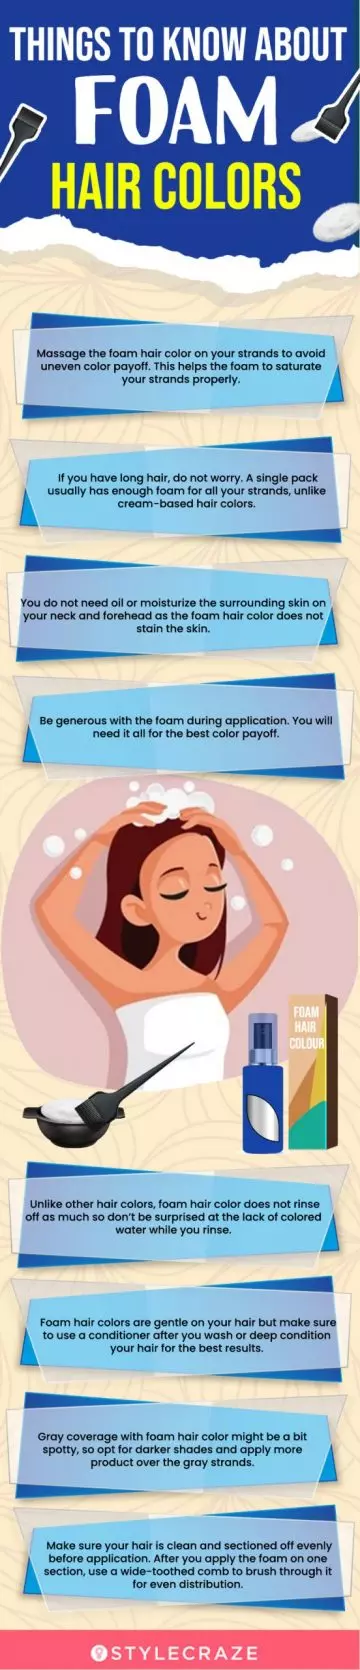 Things To Know About Foam Hair Colors (infographic)